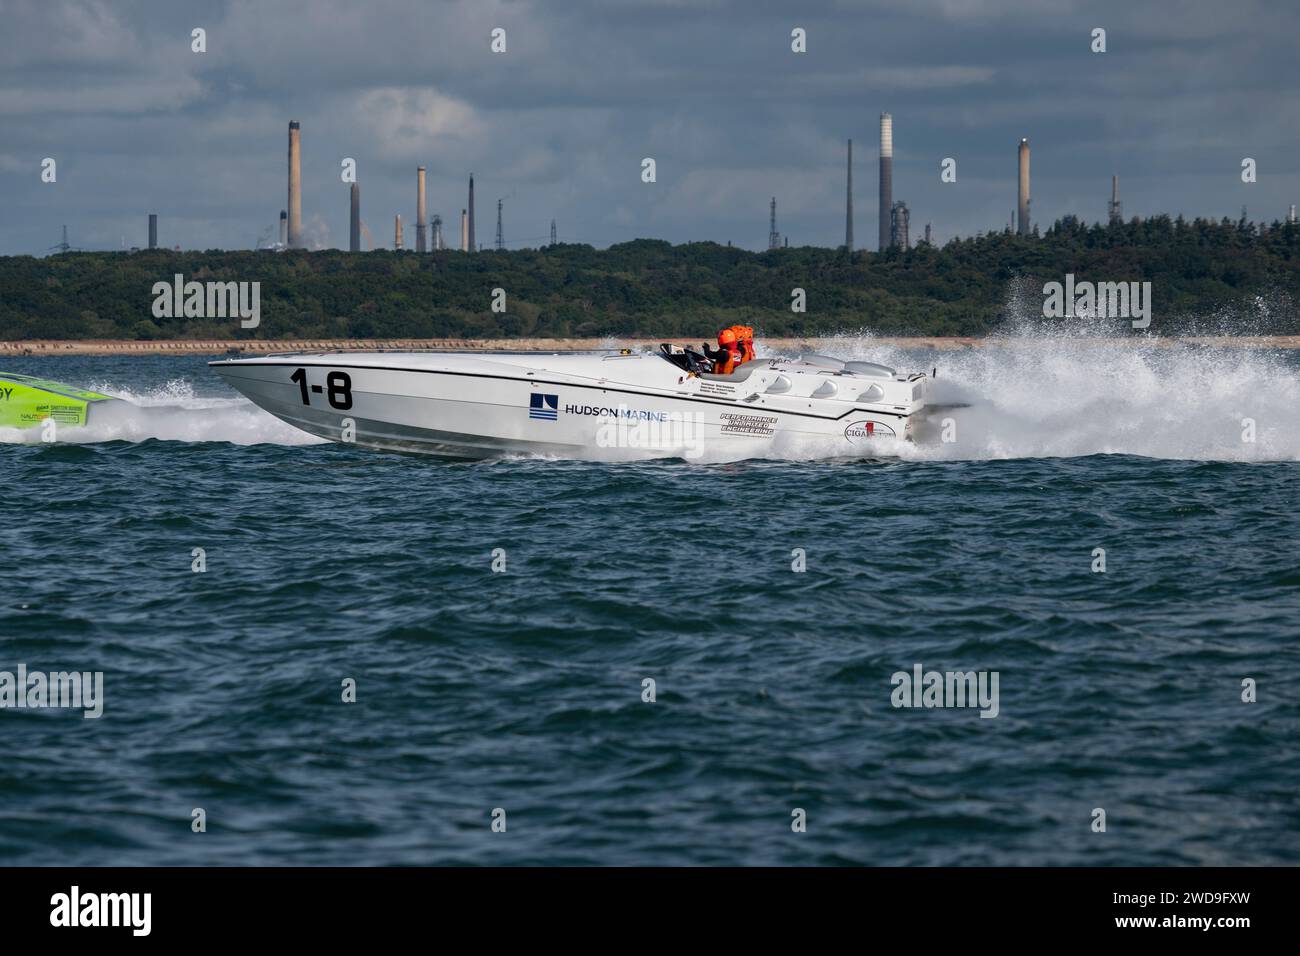 1-8 Bubbledeck a Donald Aronow designed Cigarette Offshore powerboat  competing in the 2023 Isle of Wight Cowes to Torquay and back Power Boat race Stock Photo